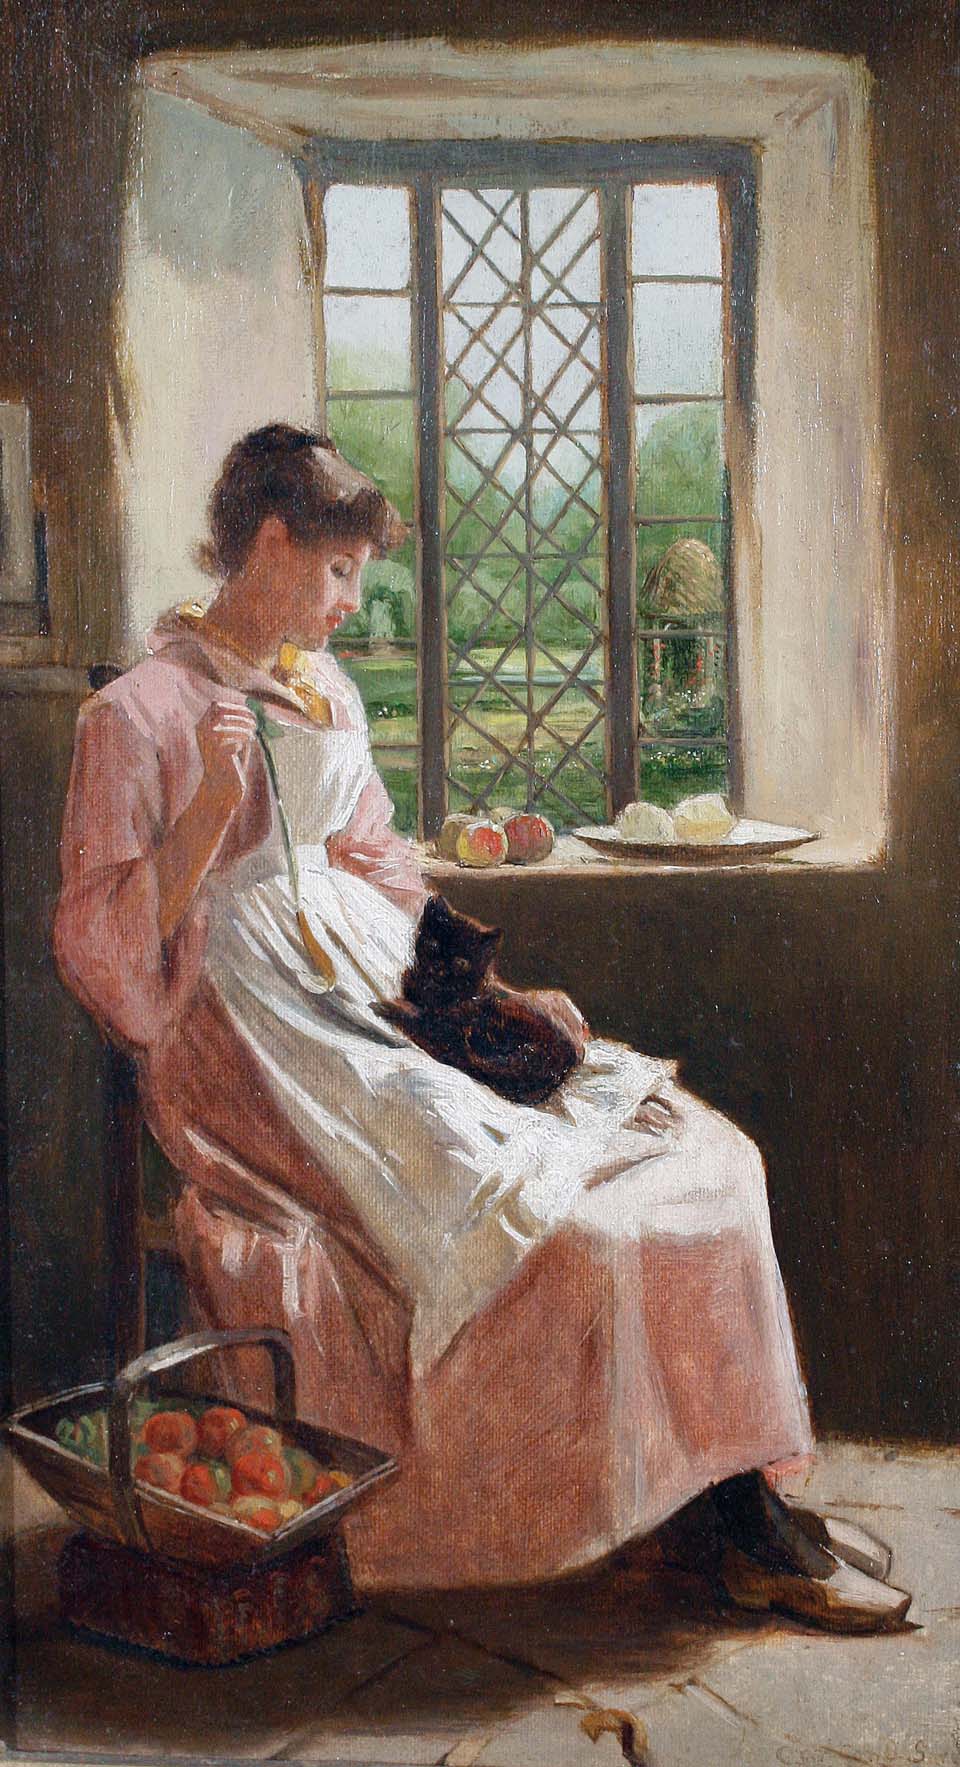 A young woman and her cat seated by a window